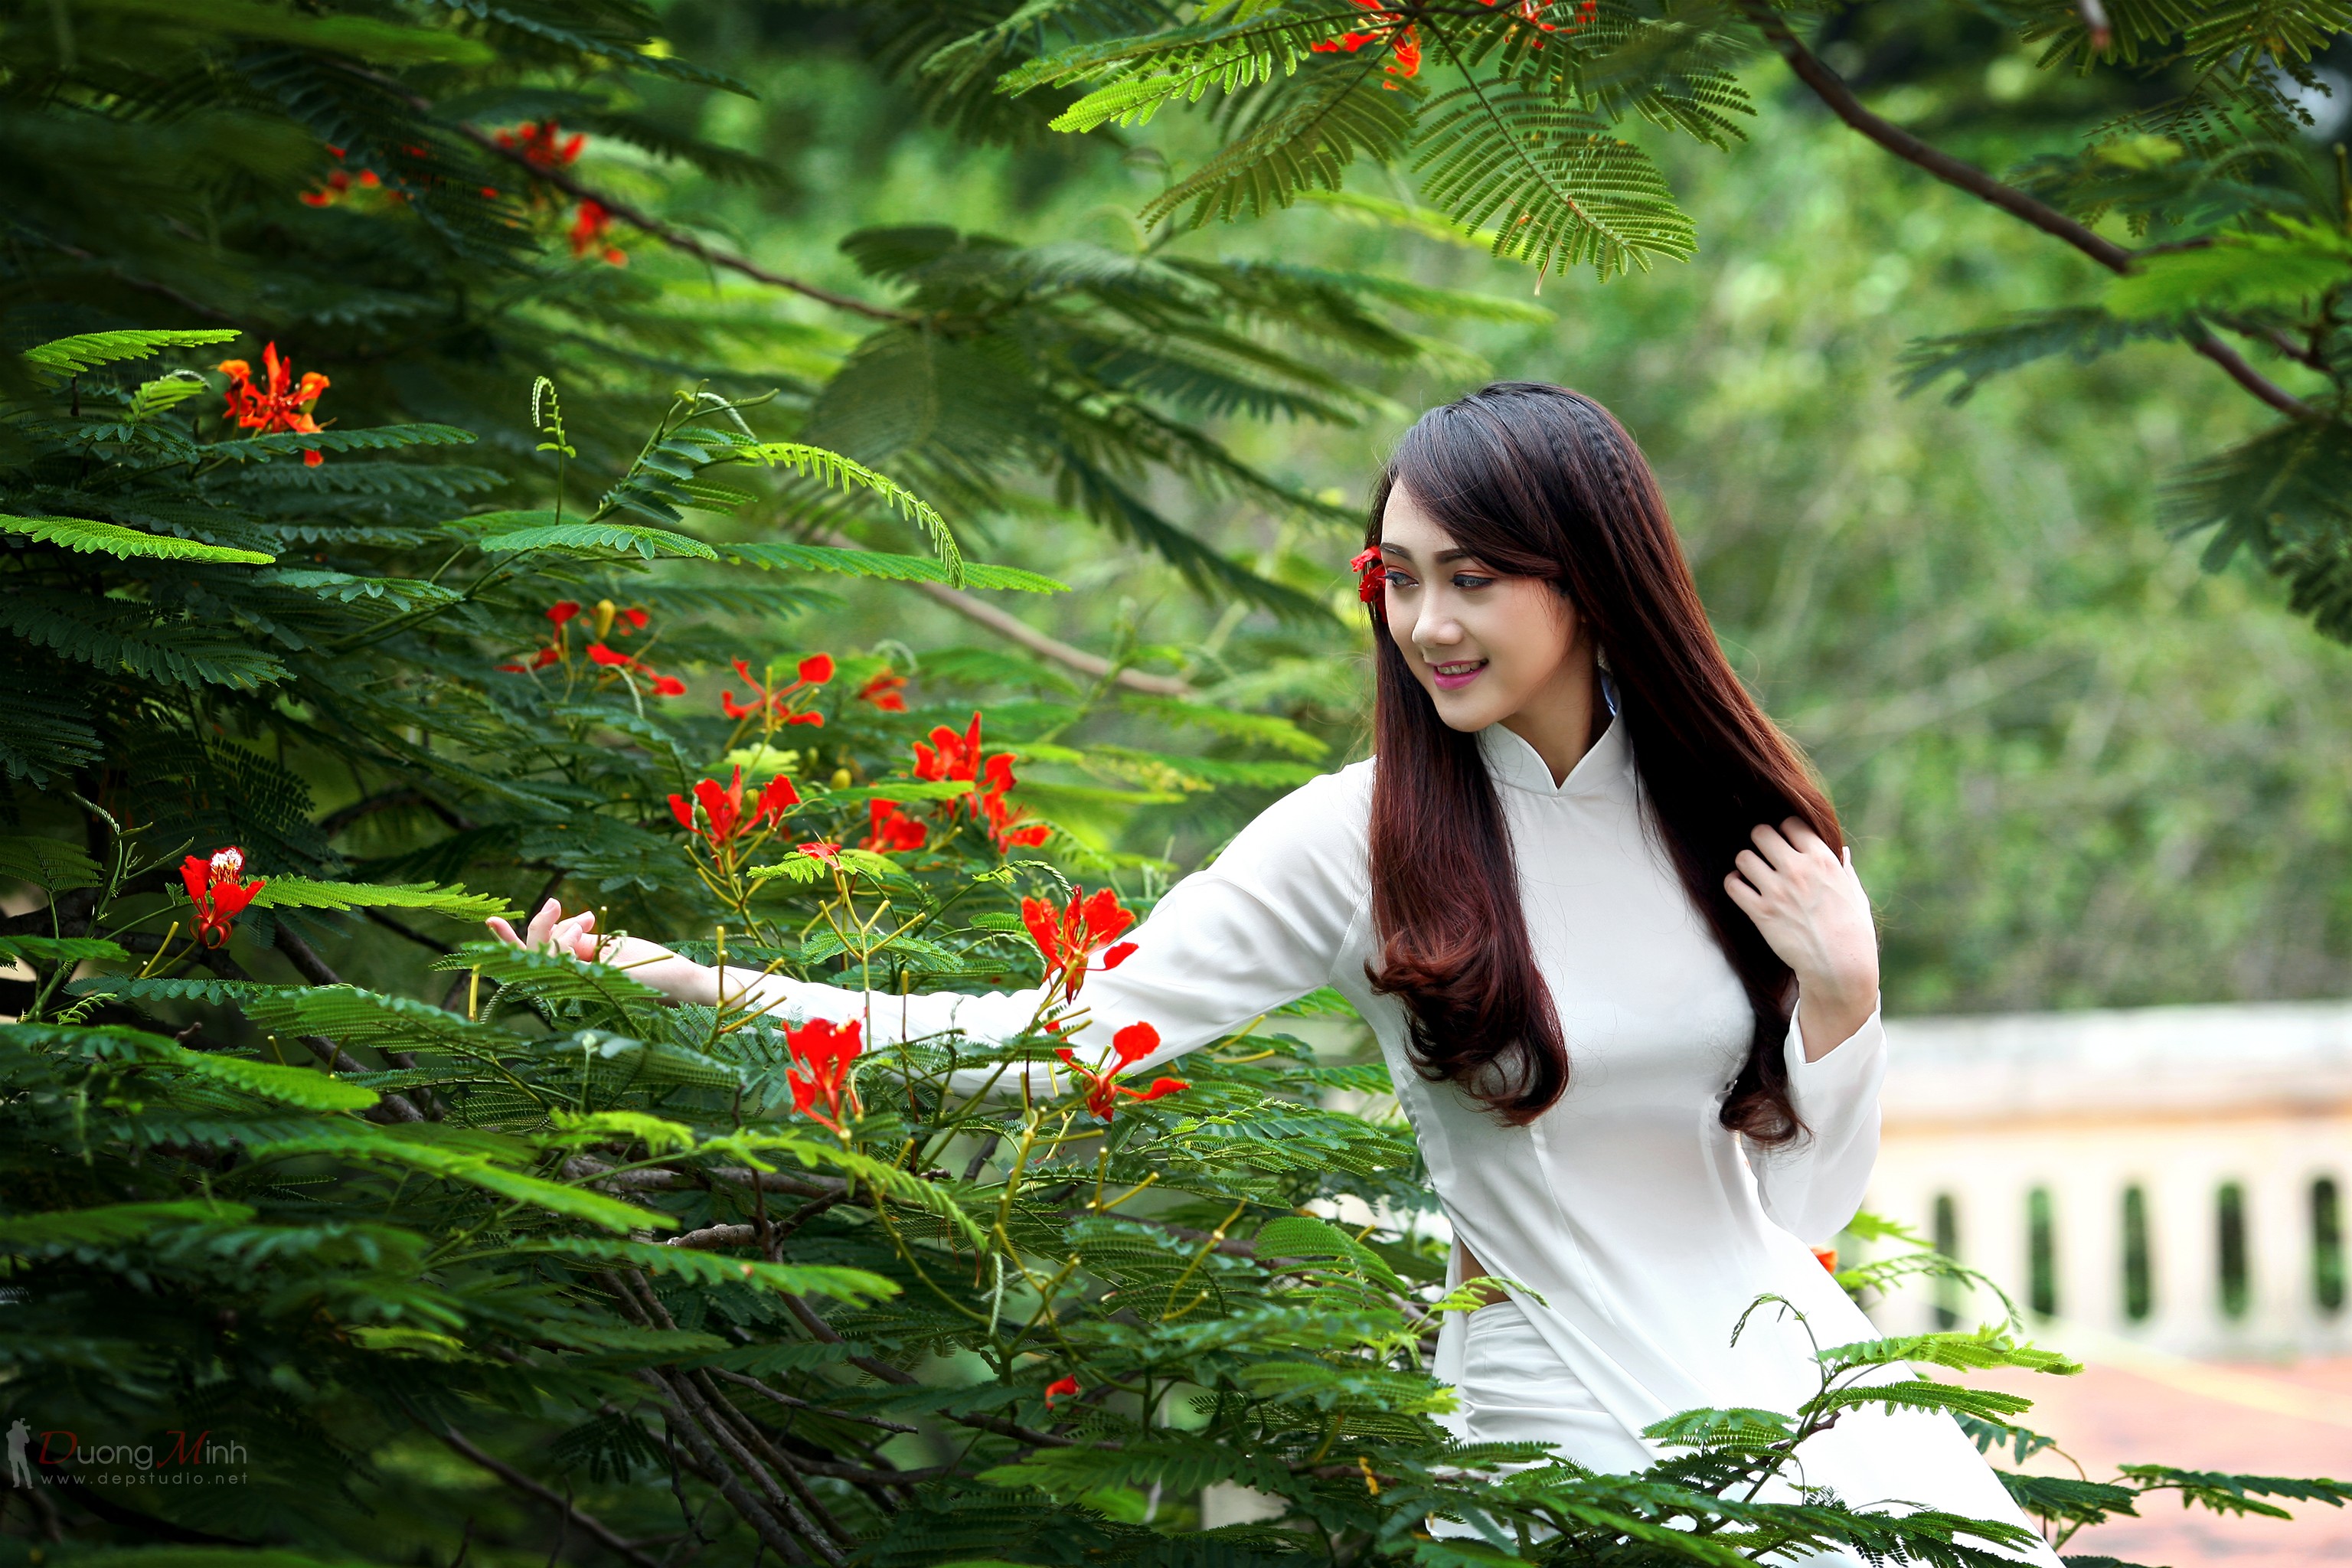 People 3072x2048 women outdoors redhead auburn hair looking away white dress long hair women Asian model outdoors watermarked smiling white clothing flowers plants Asia